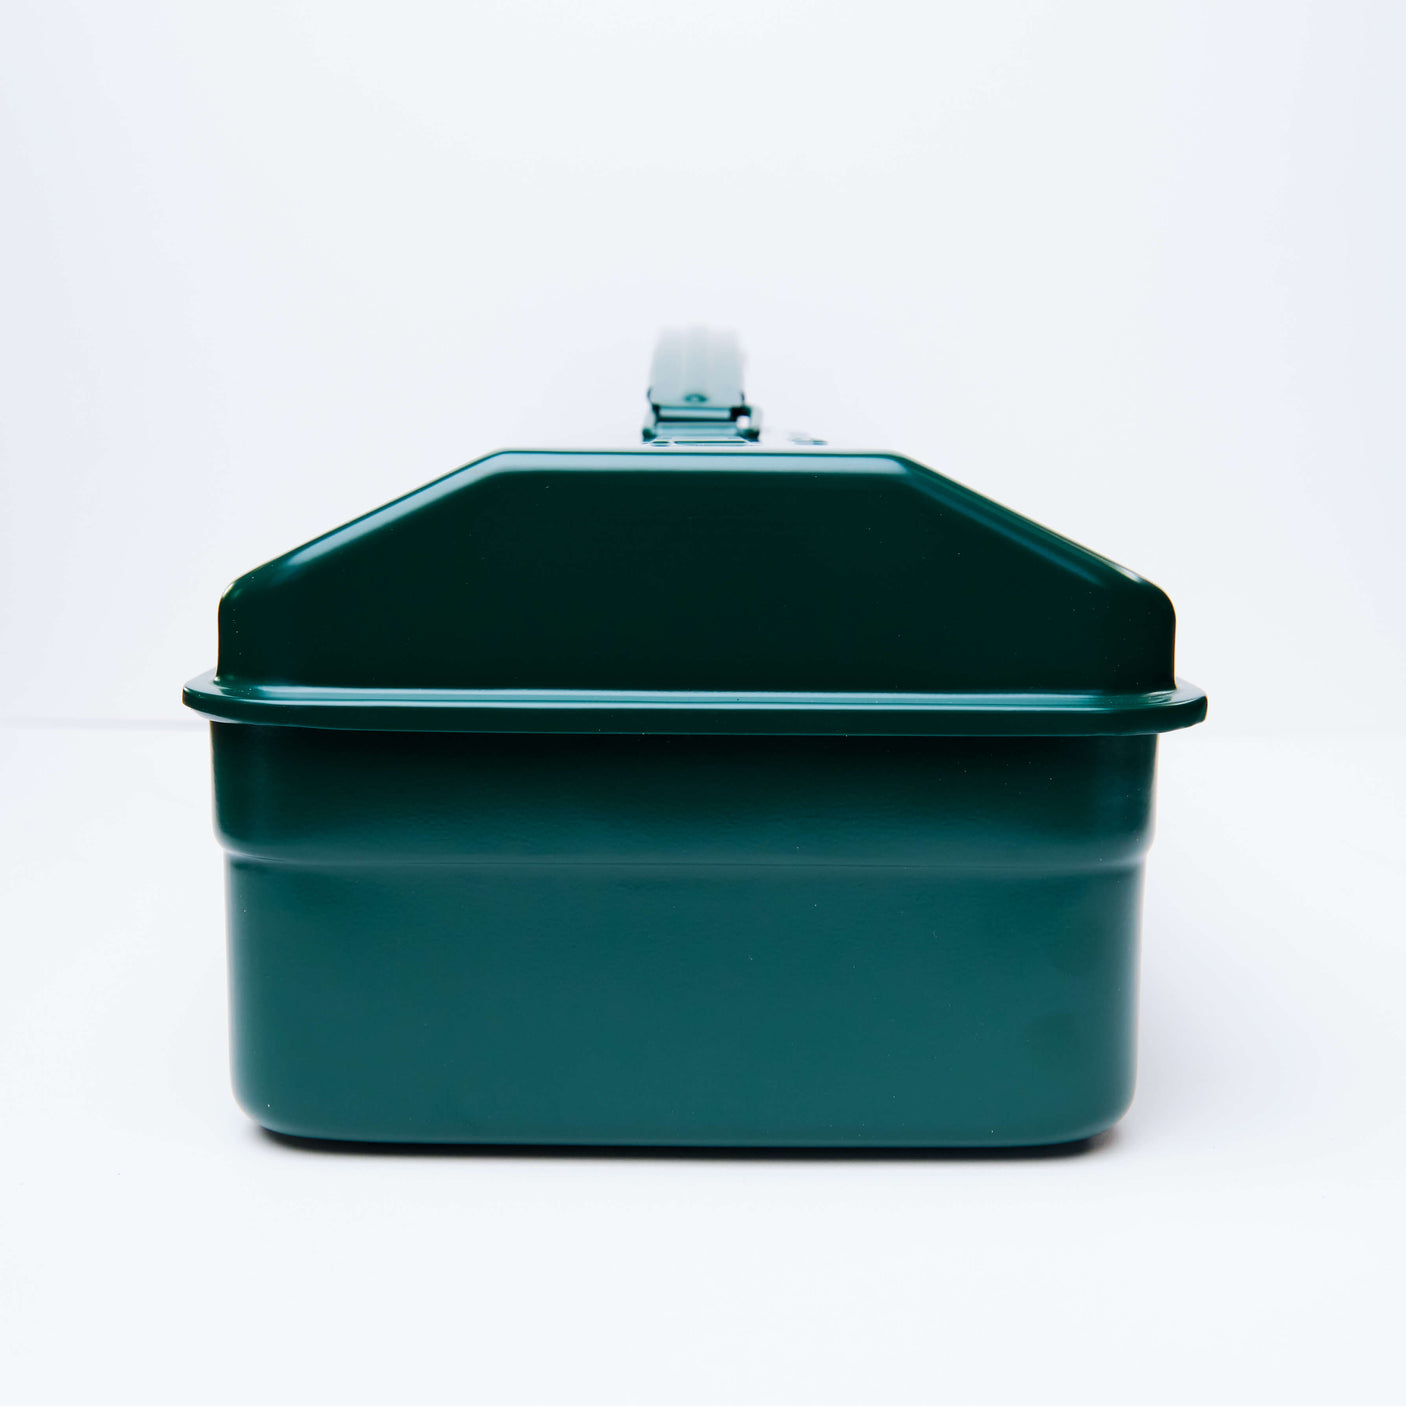 TOYO Camber-top Toolbox Y-350 AG (Antique Green)